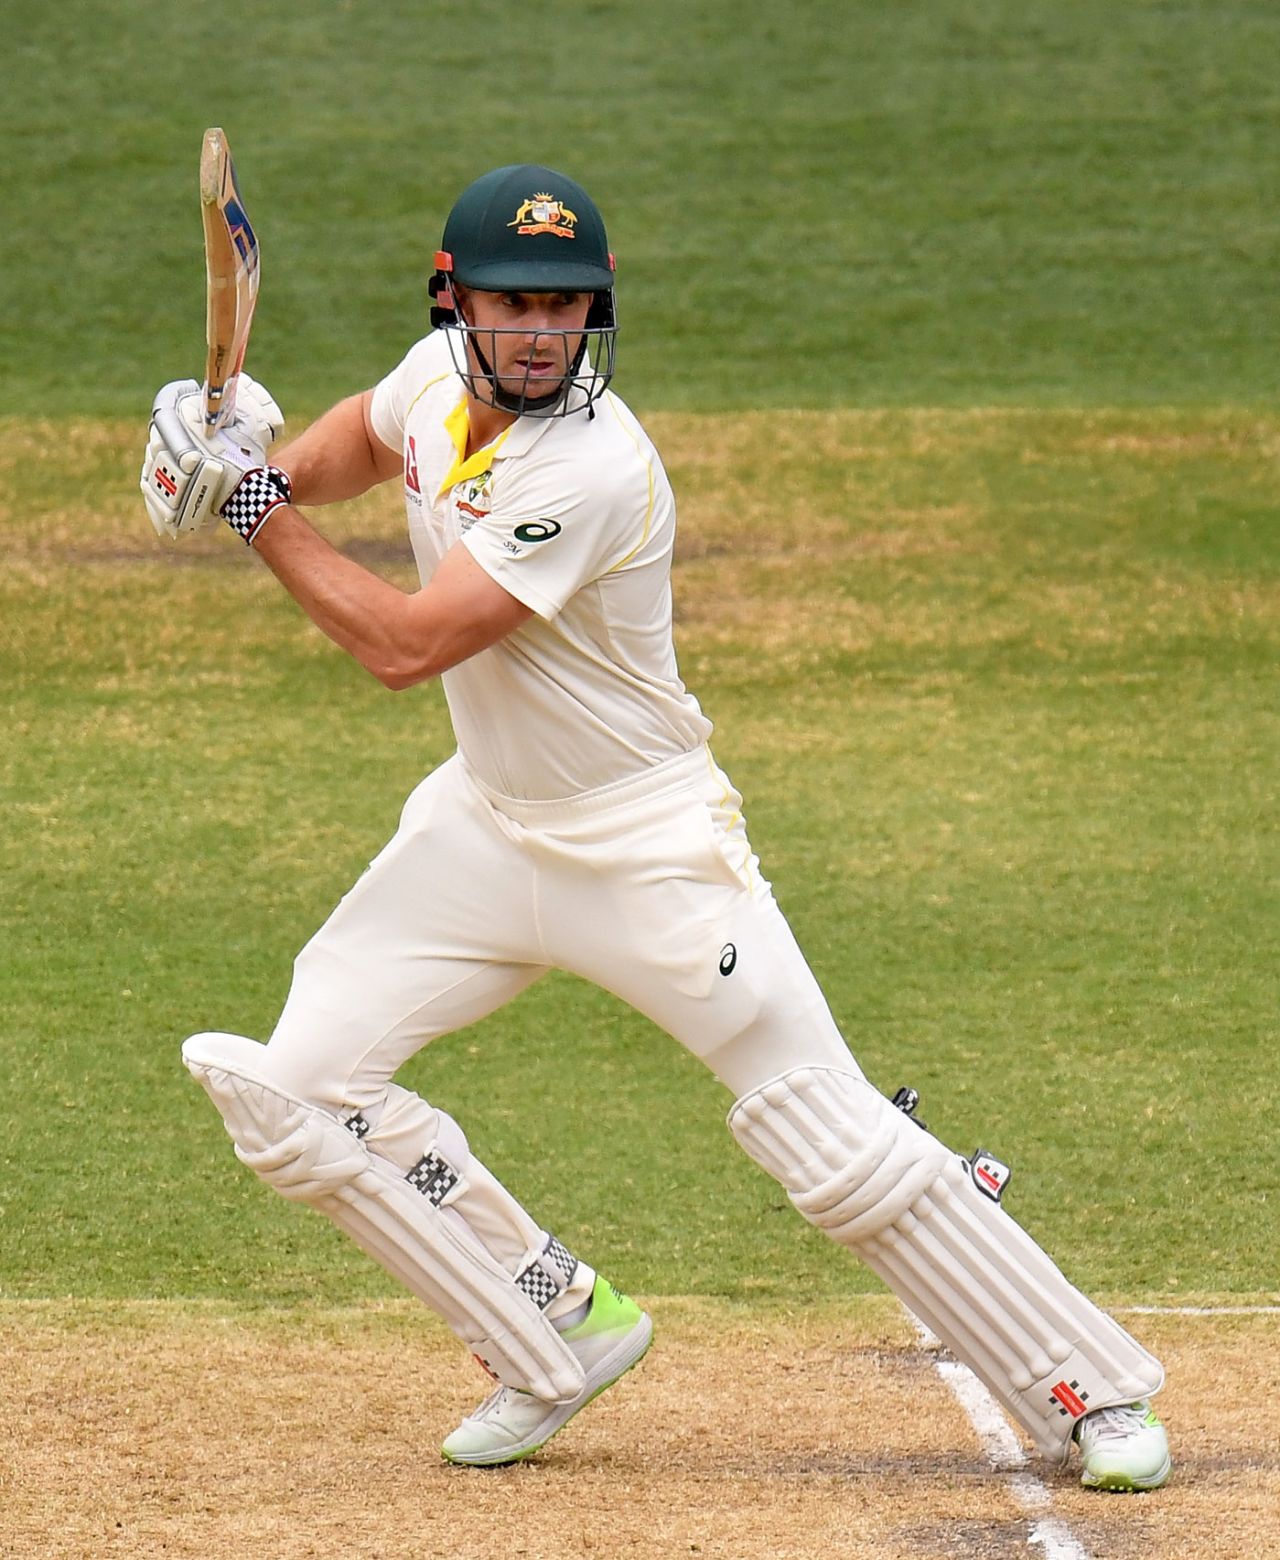 Shaun Marsh fought his way through to tea, Australia v England, 2nd Test, The Ashes 2017-18, 2nd day, Adelaide, December 3, 2017